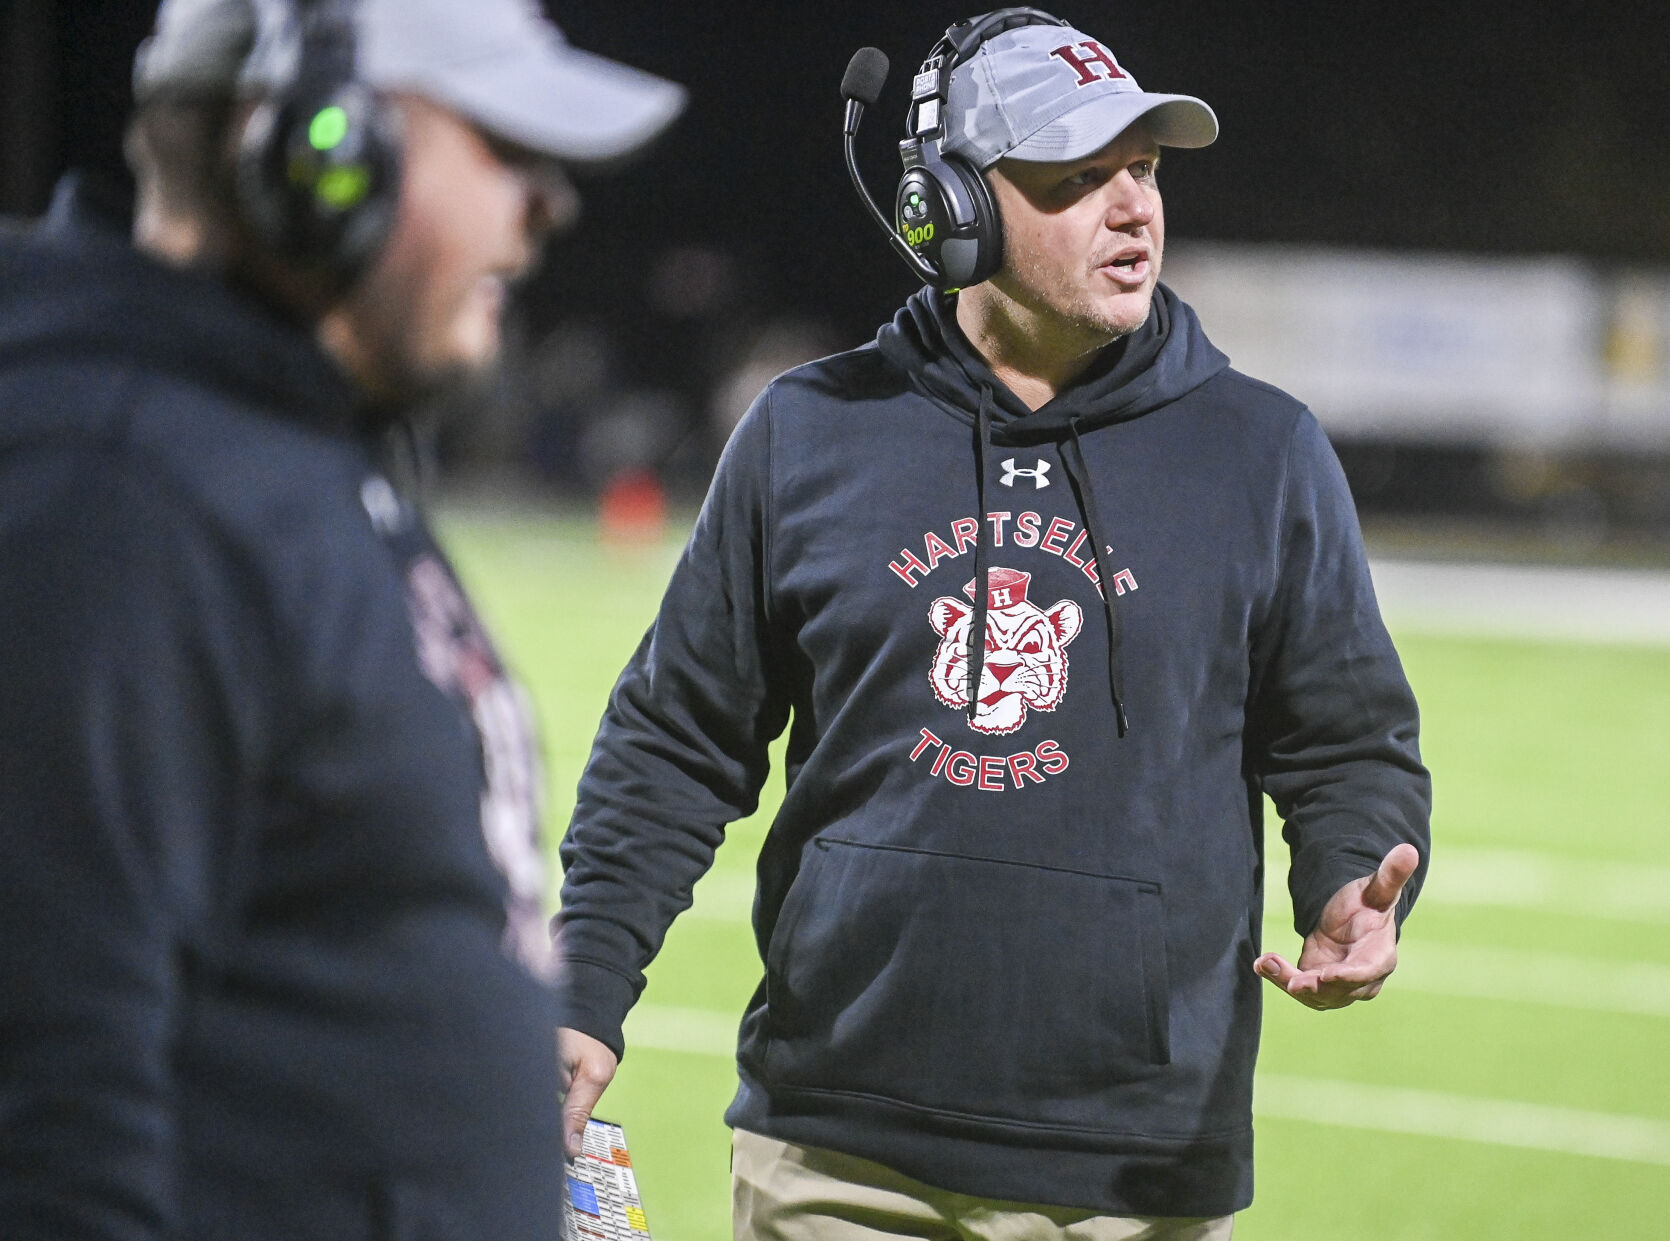 Bryan Moore: From Opelika Assistant to Head Coach of Opelika High School